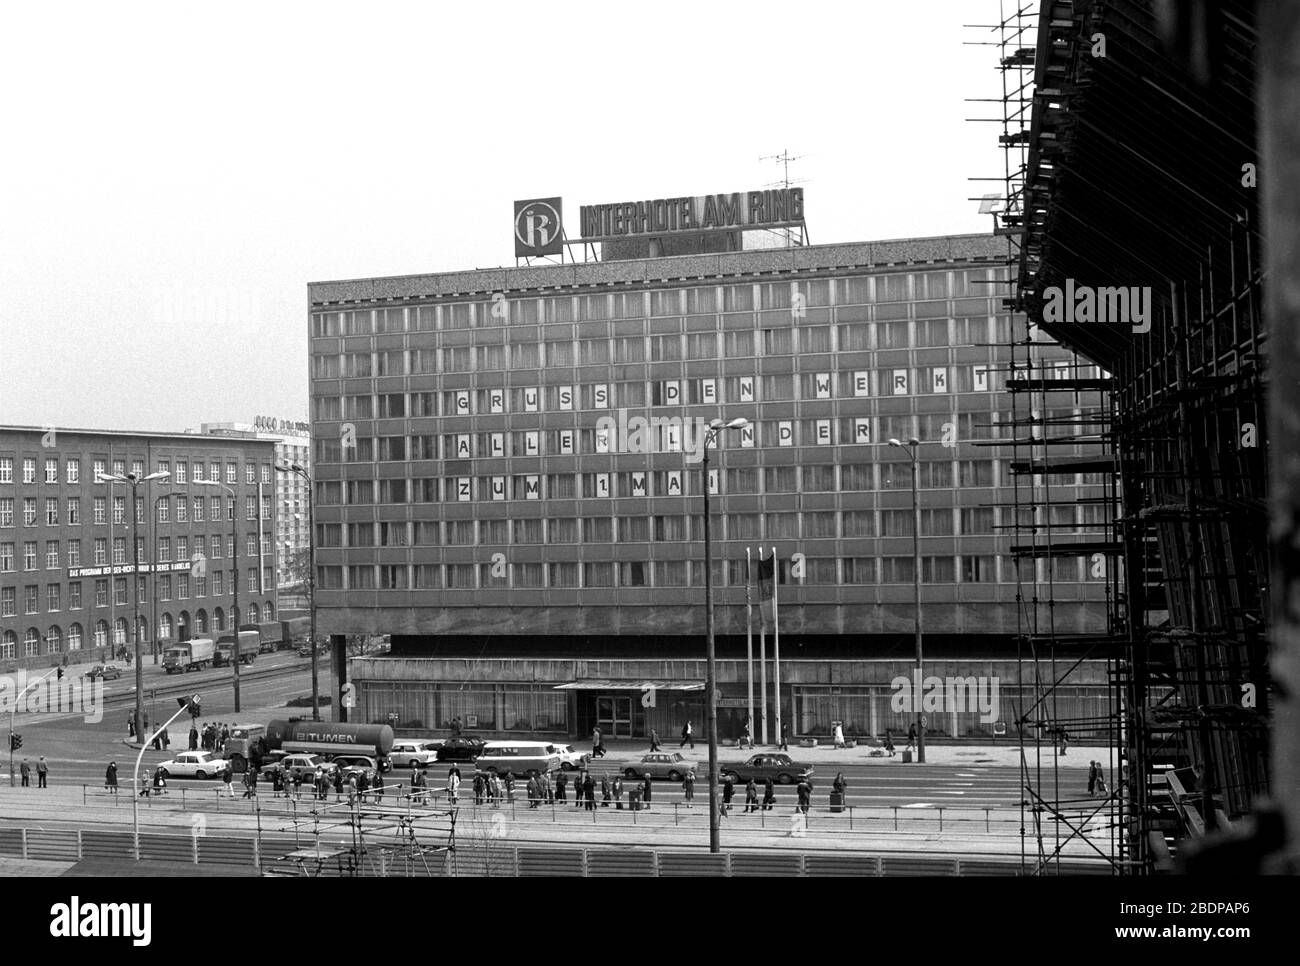 15 April 1980, Saxony, Leipzig: In front of the construction site 'Neues Gewandhaus Leipzig' the appearance of the Karl-Marx-Platz in April 1980 with its old and newly constructed buildings is visible. The picture shows the Interhotel 'Am Ring' with the lettering 'Greetings to the working people of all countries on 1 May'. Exact date of photograph not known. Photo: Volkmar Heinz/dpa-Zentralbild/ZB Stock Photo